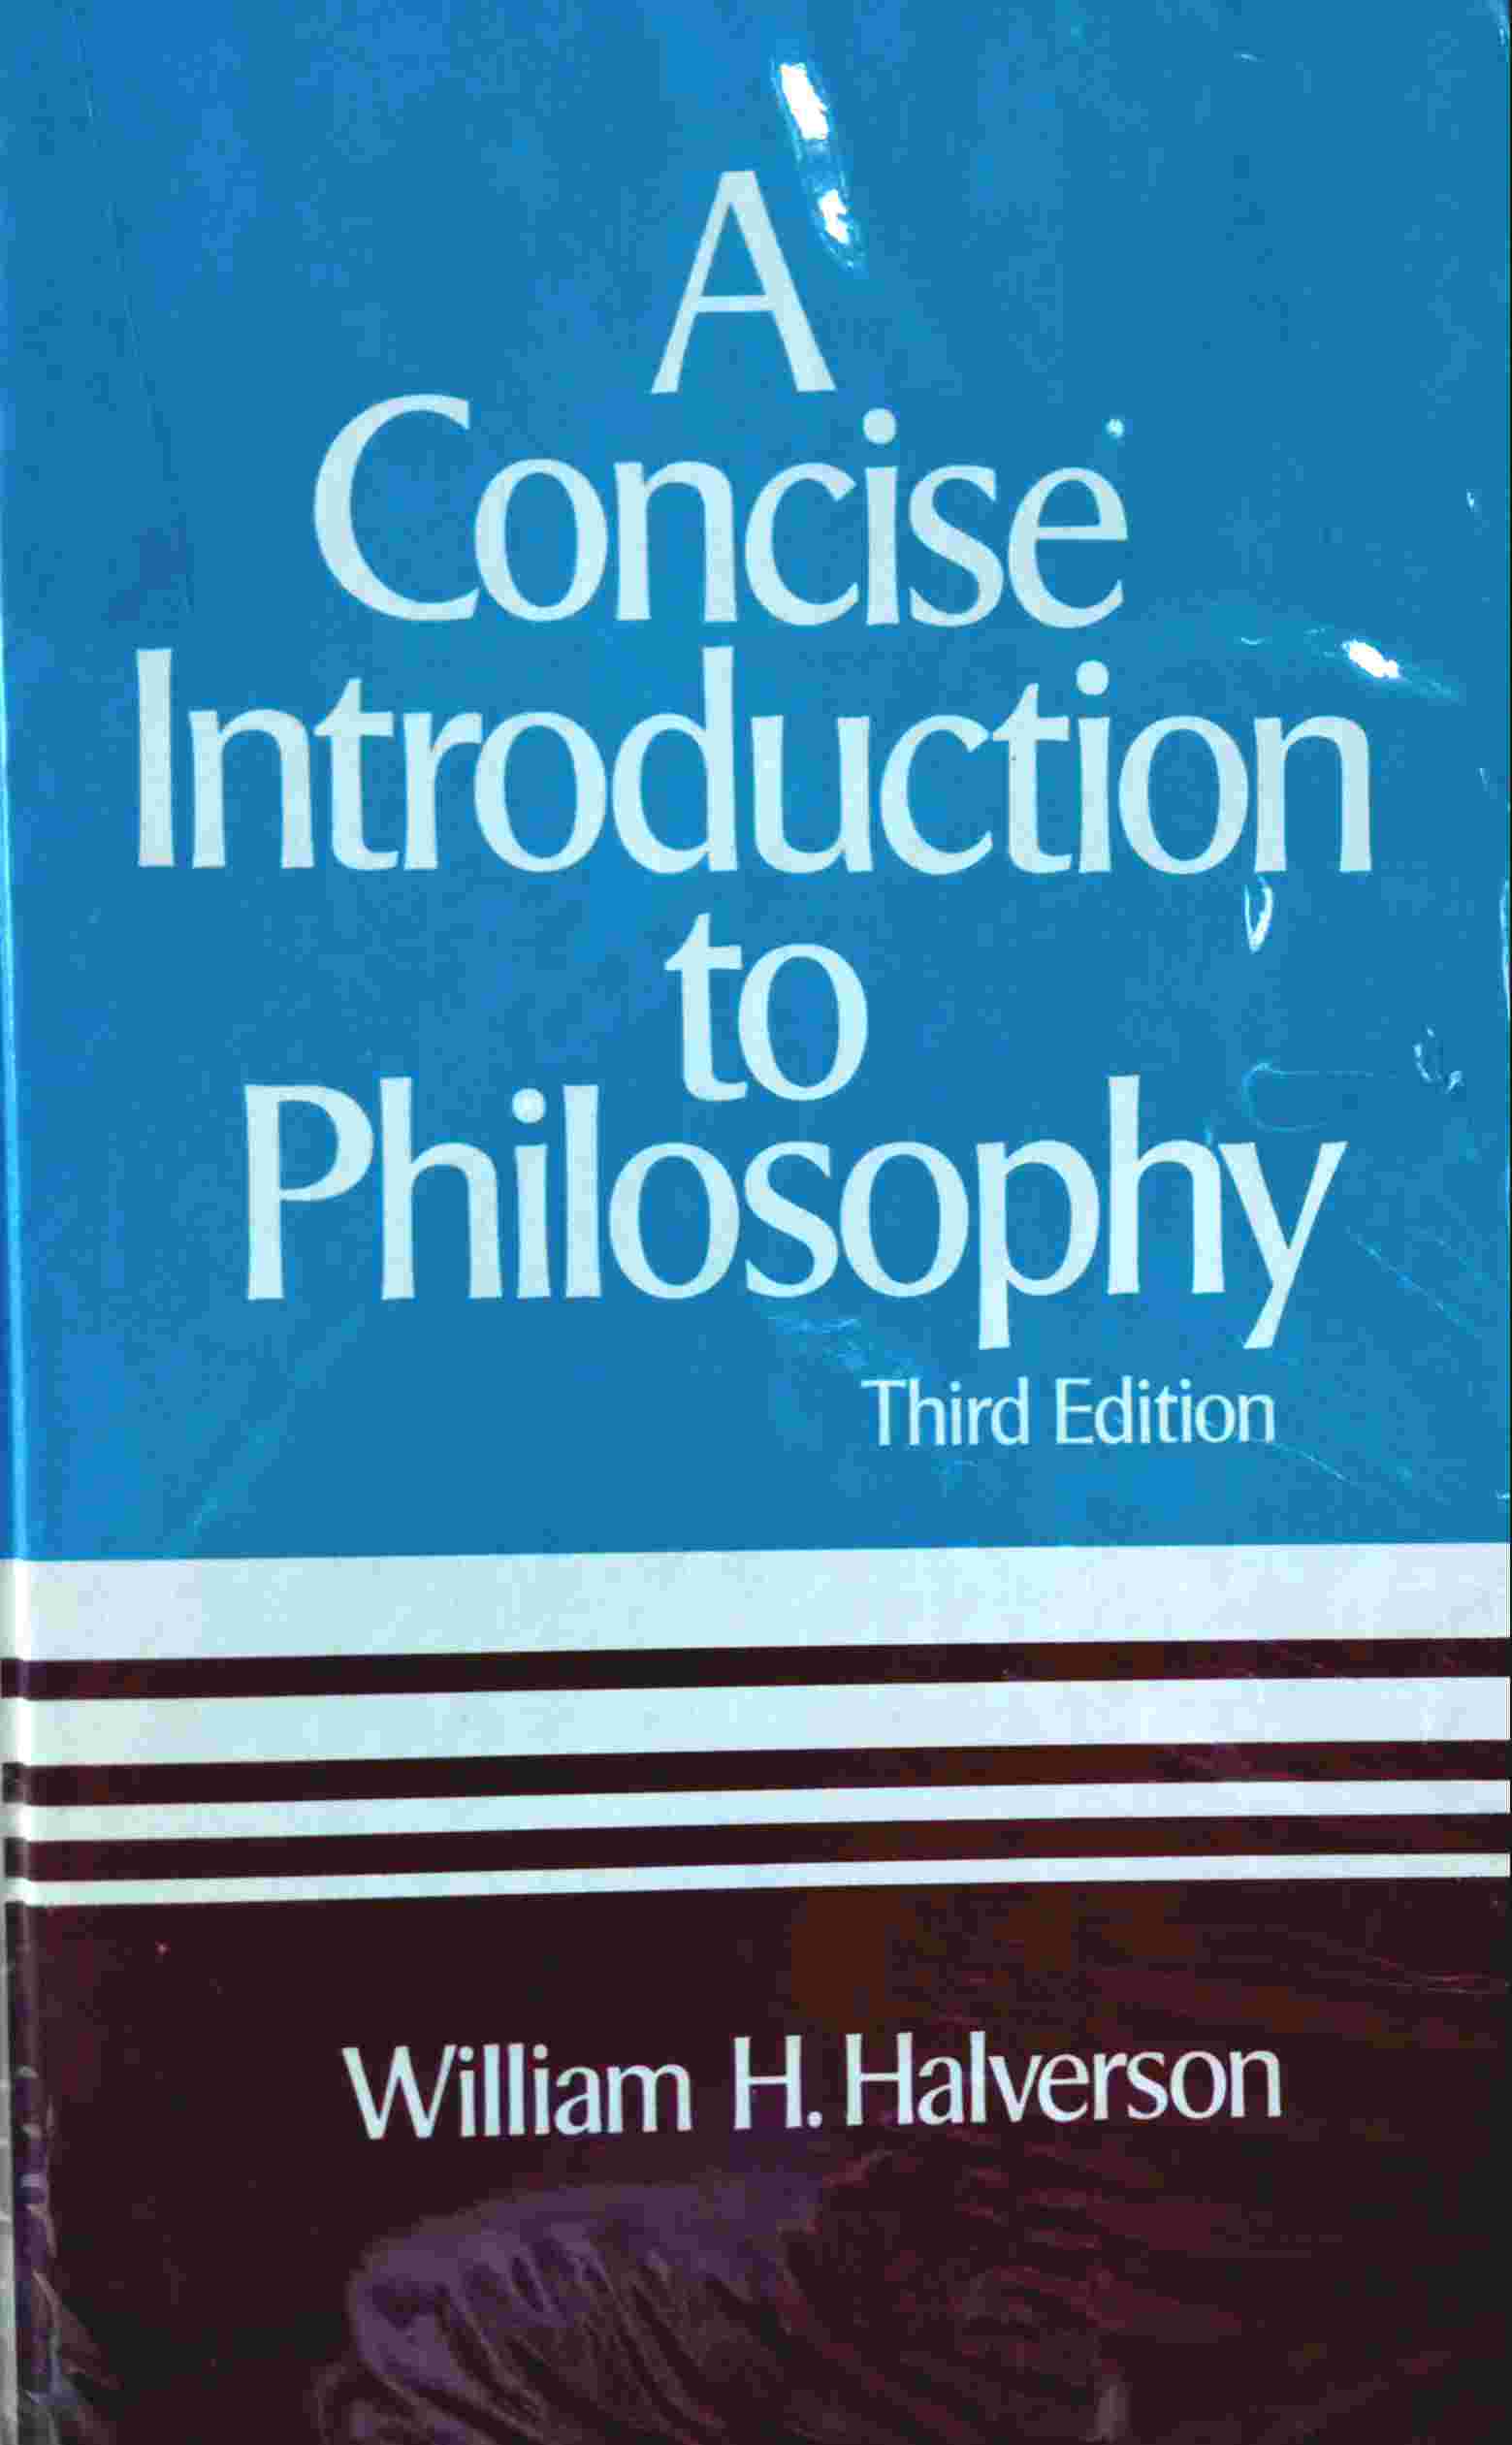 A CONCISE INTRODUCTION TO PHILOSOPHY